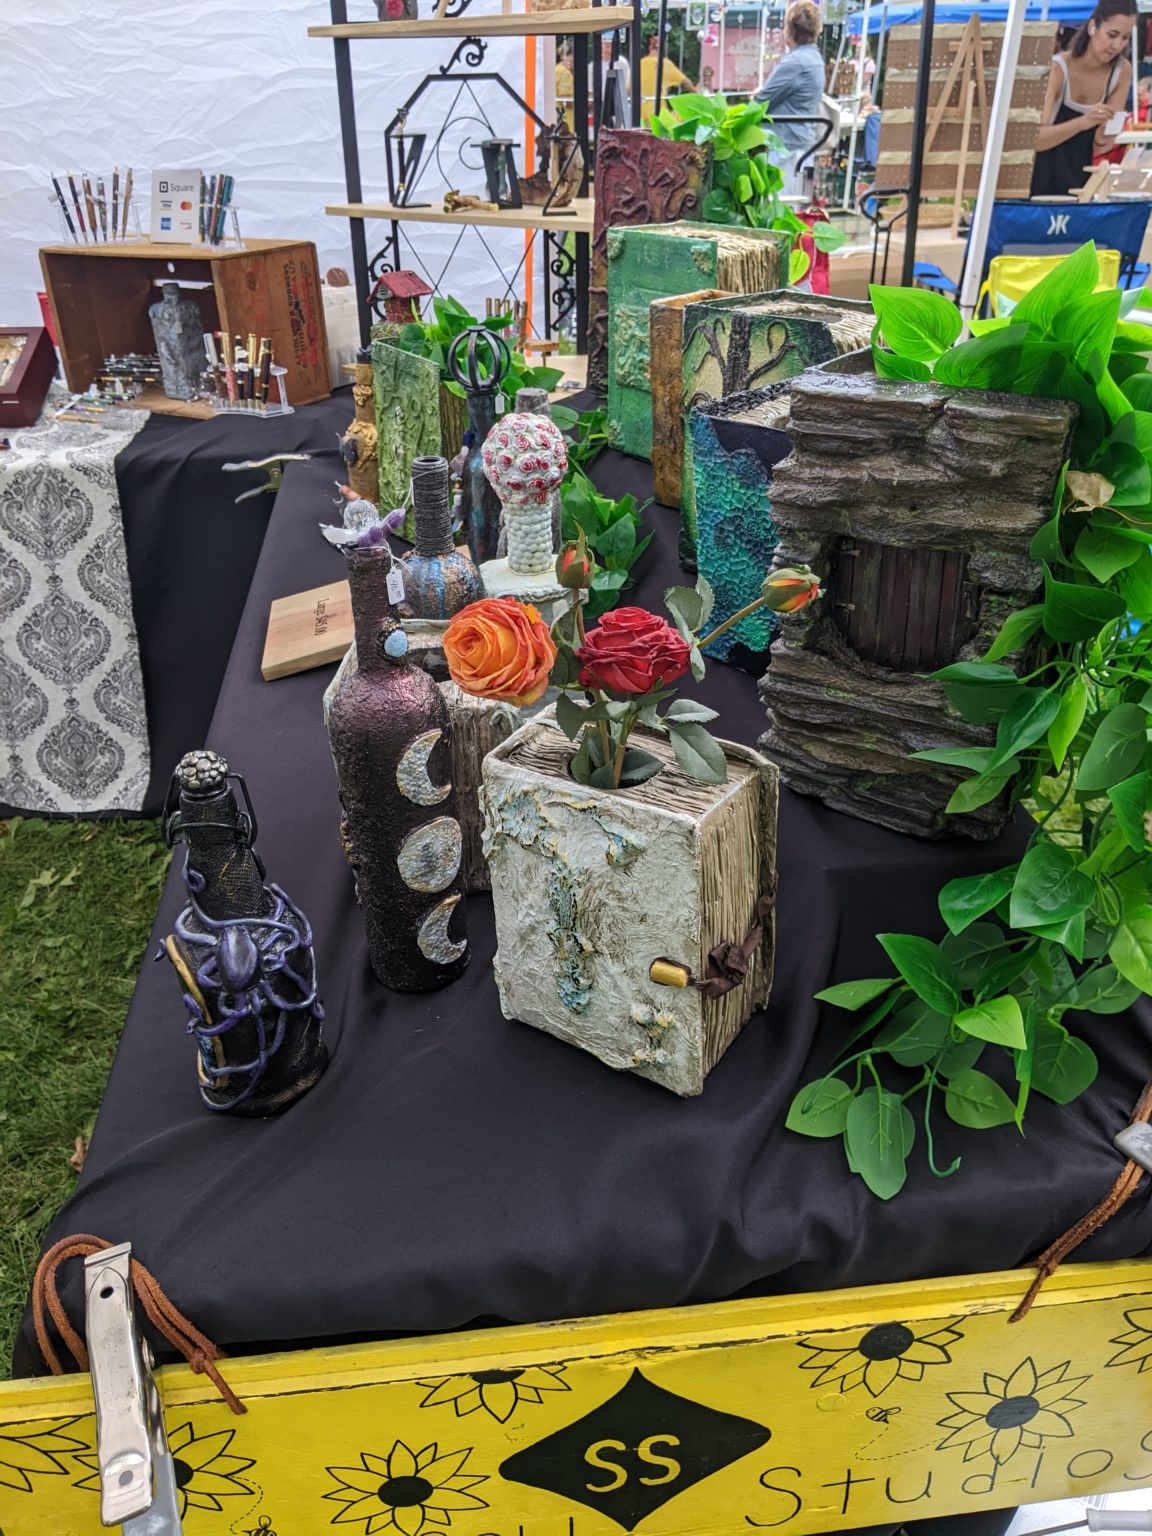 A close up look at some of the products Scott and Corinne sell at their vendor booth, such as handcrafted pens and vases.